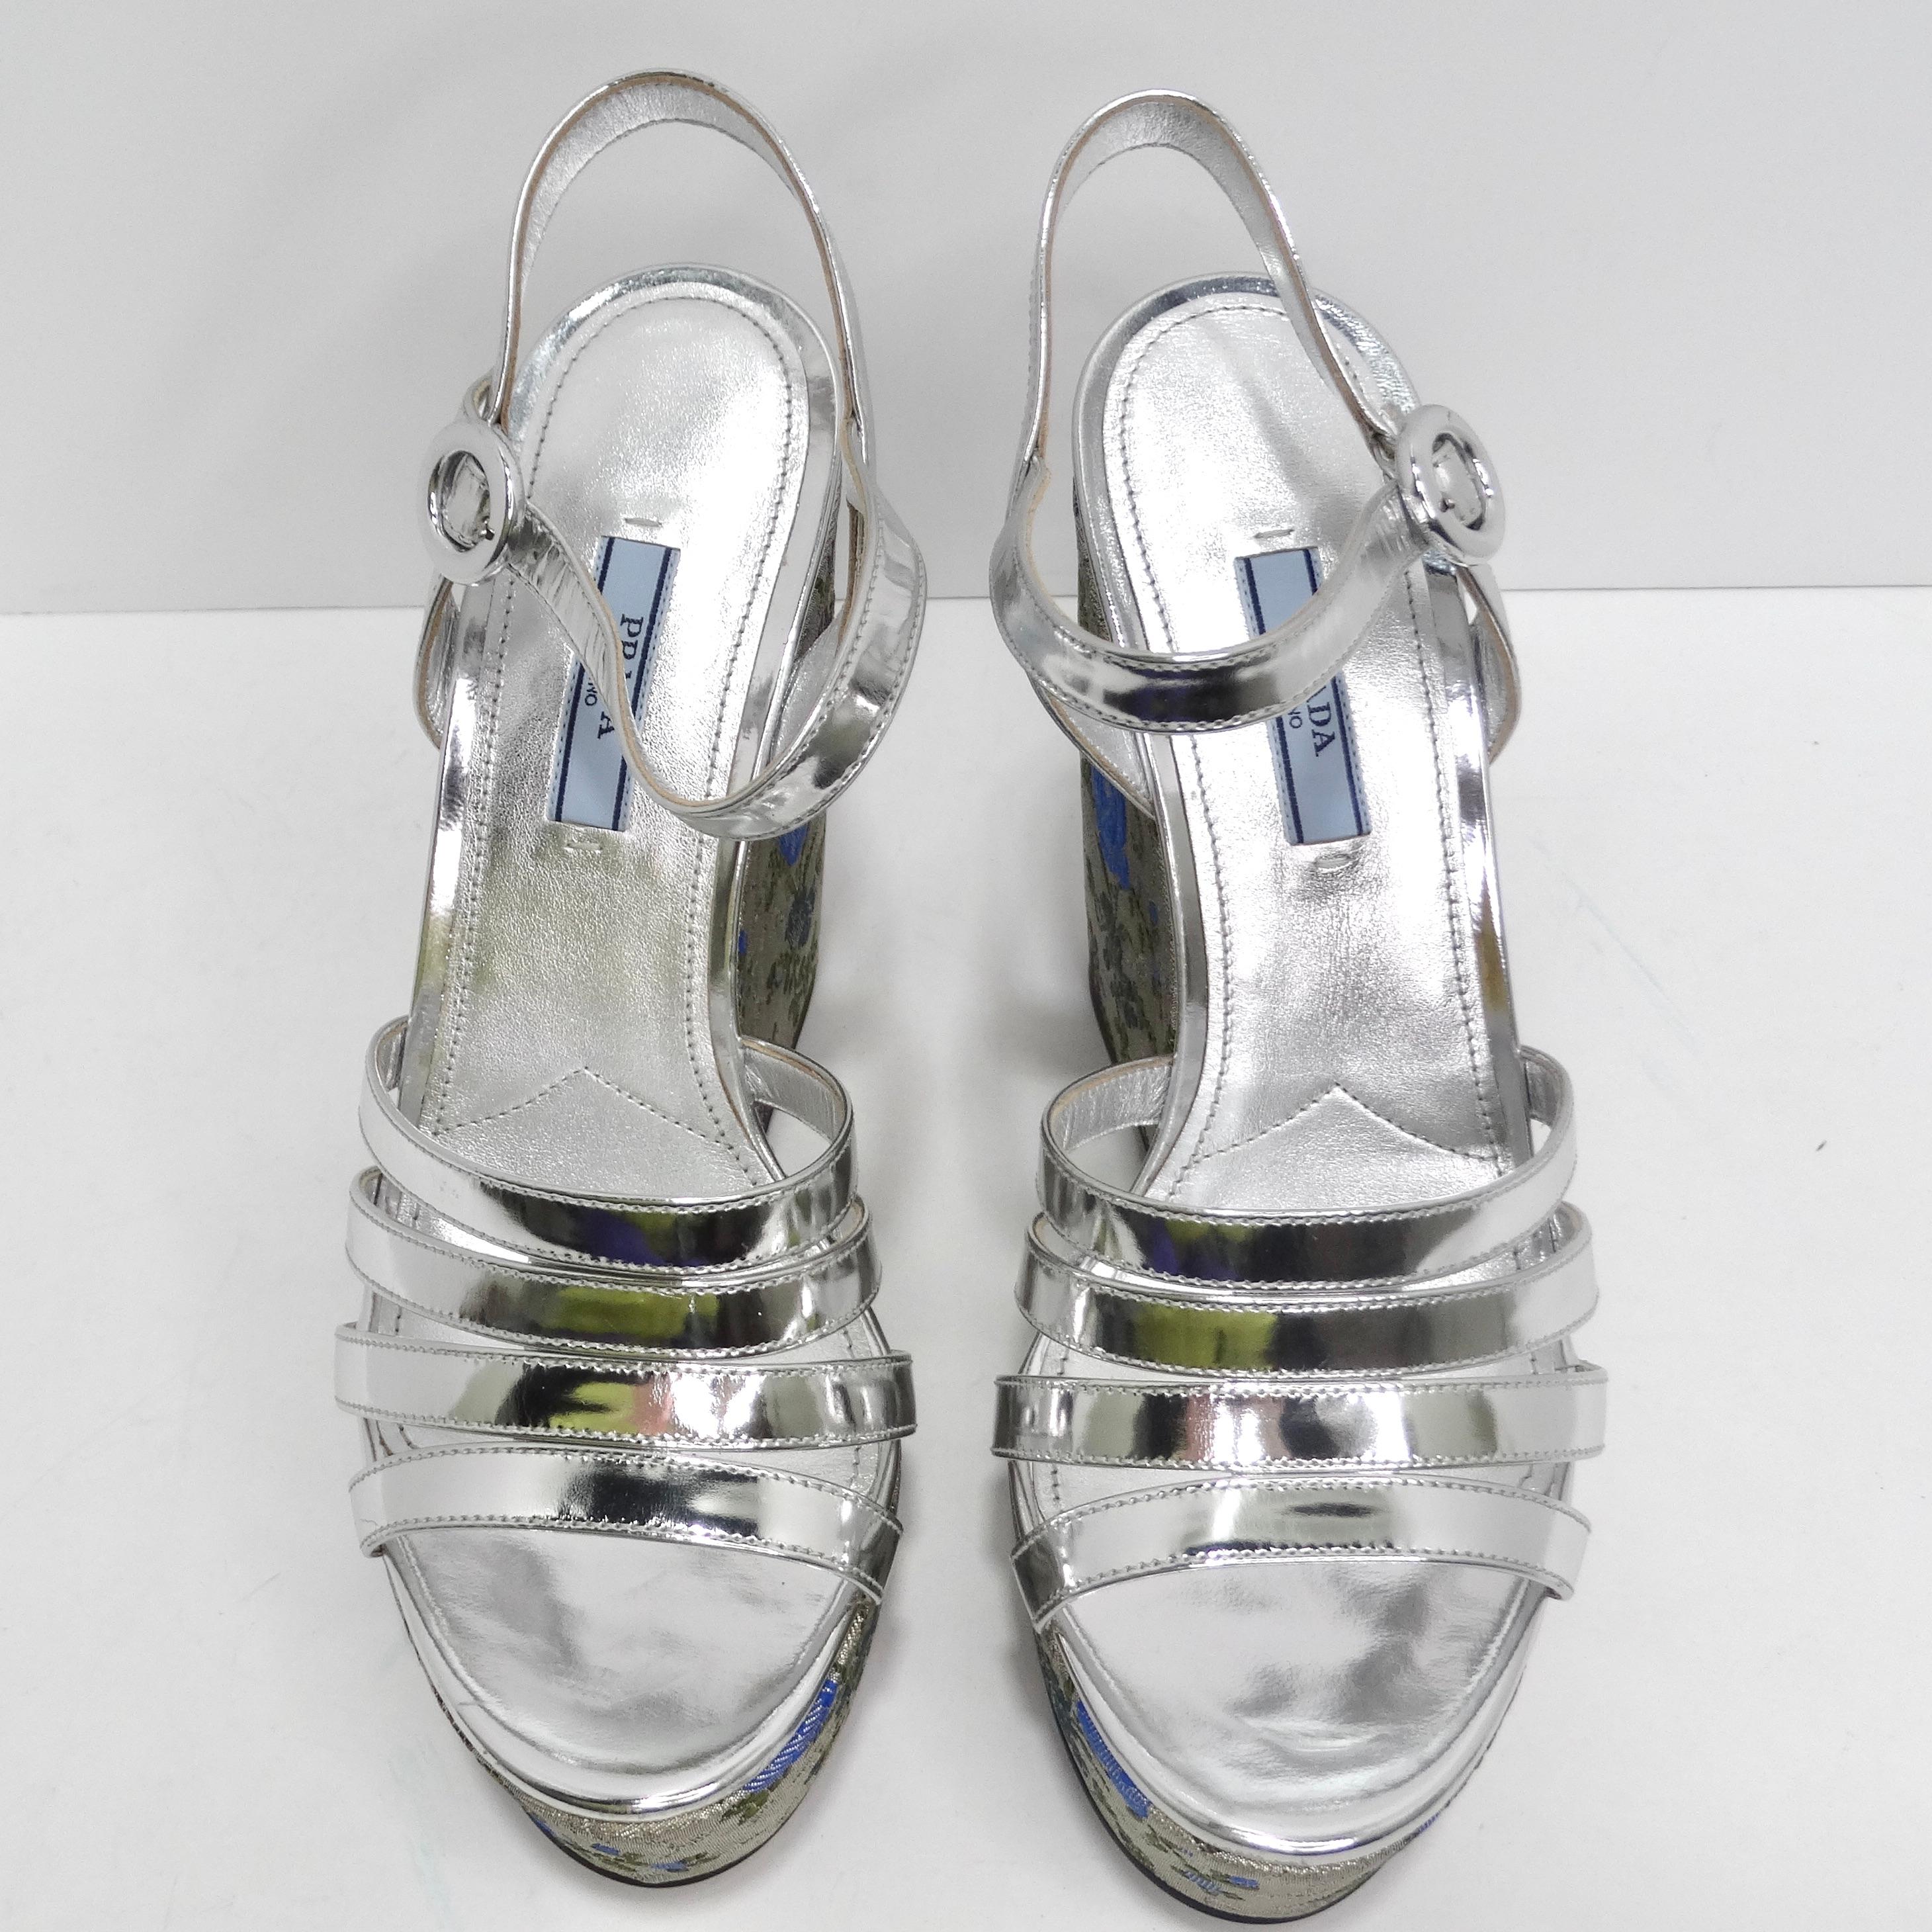 Introducing a pair of shoes that combine elegance with a touch of whimsy - the Prada Metallic Silver Floral Jacquard Leather Wedge Sandals. These metallic silver leather heels with a vibrant floral print wedge and strappy design are more than just